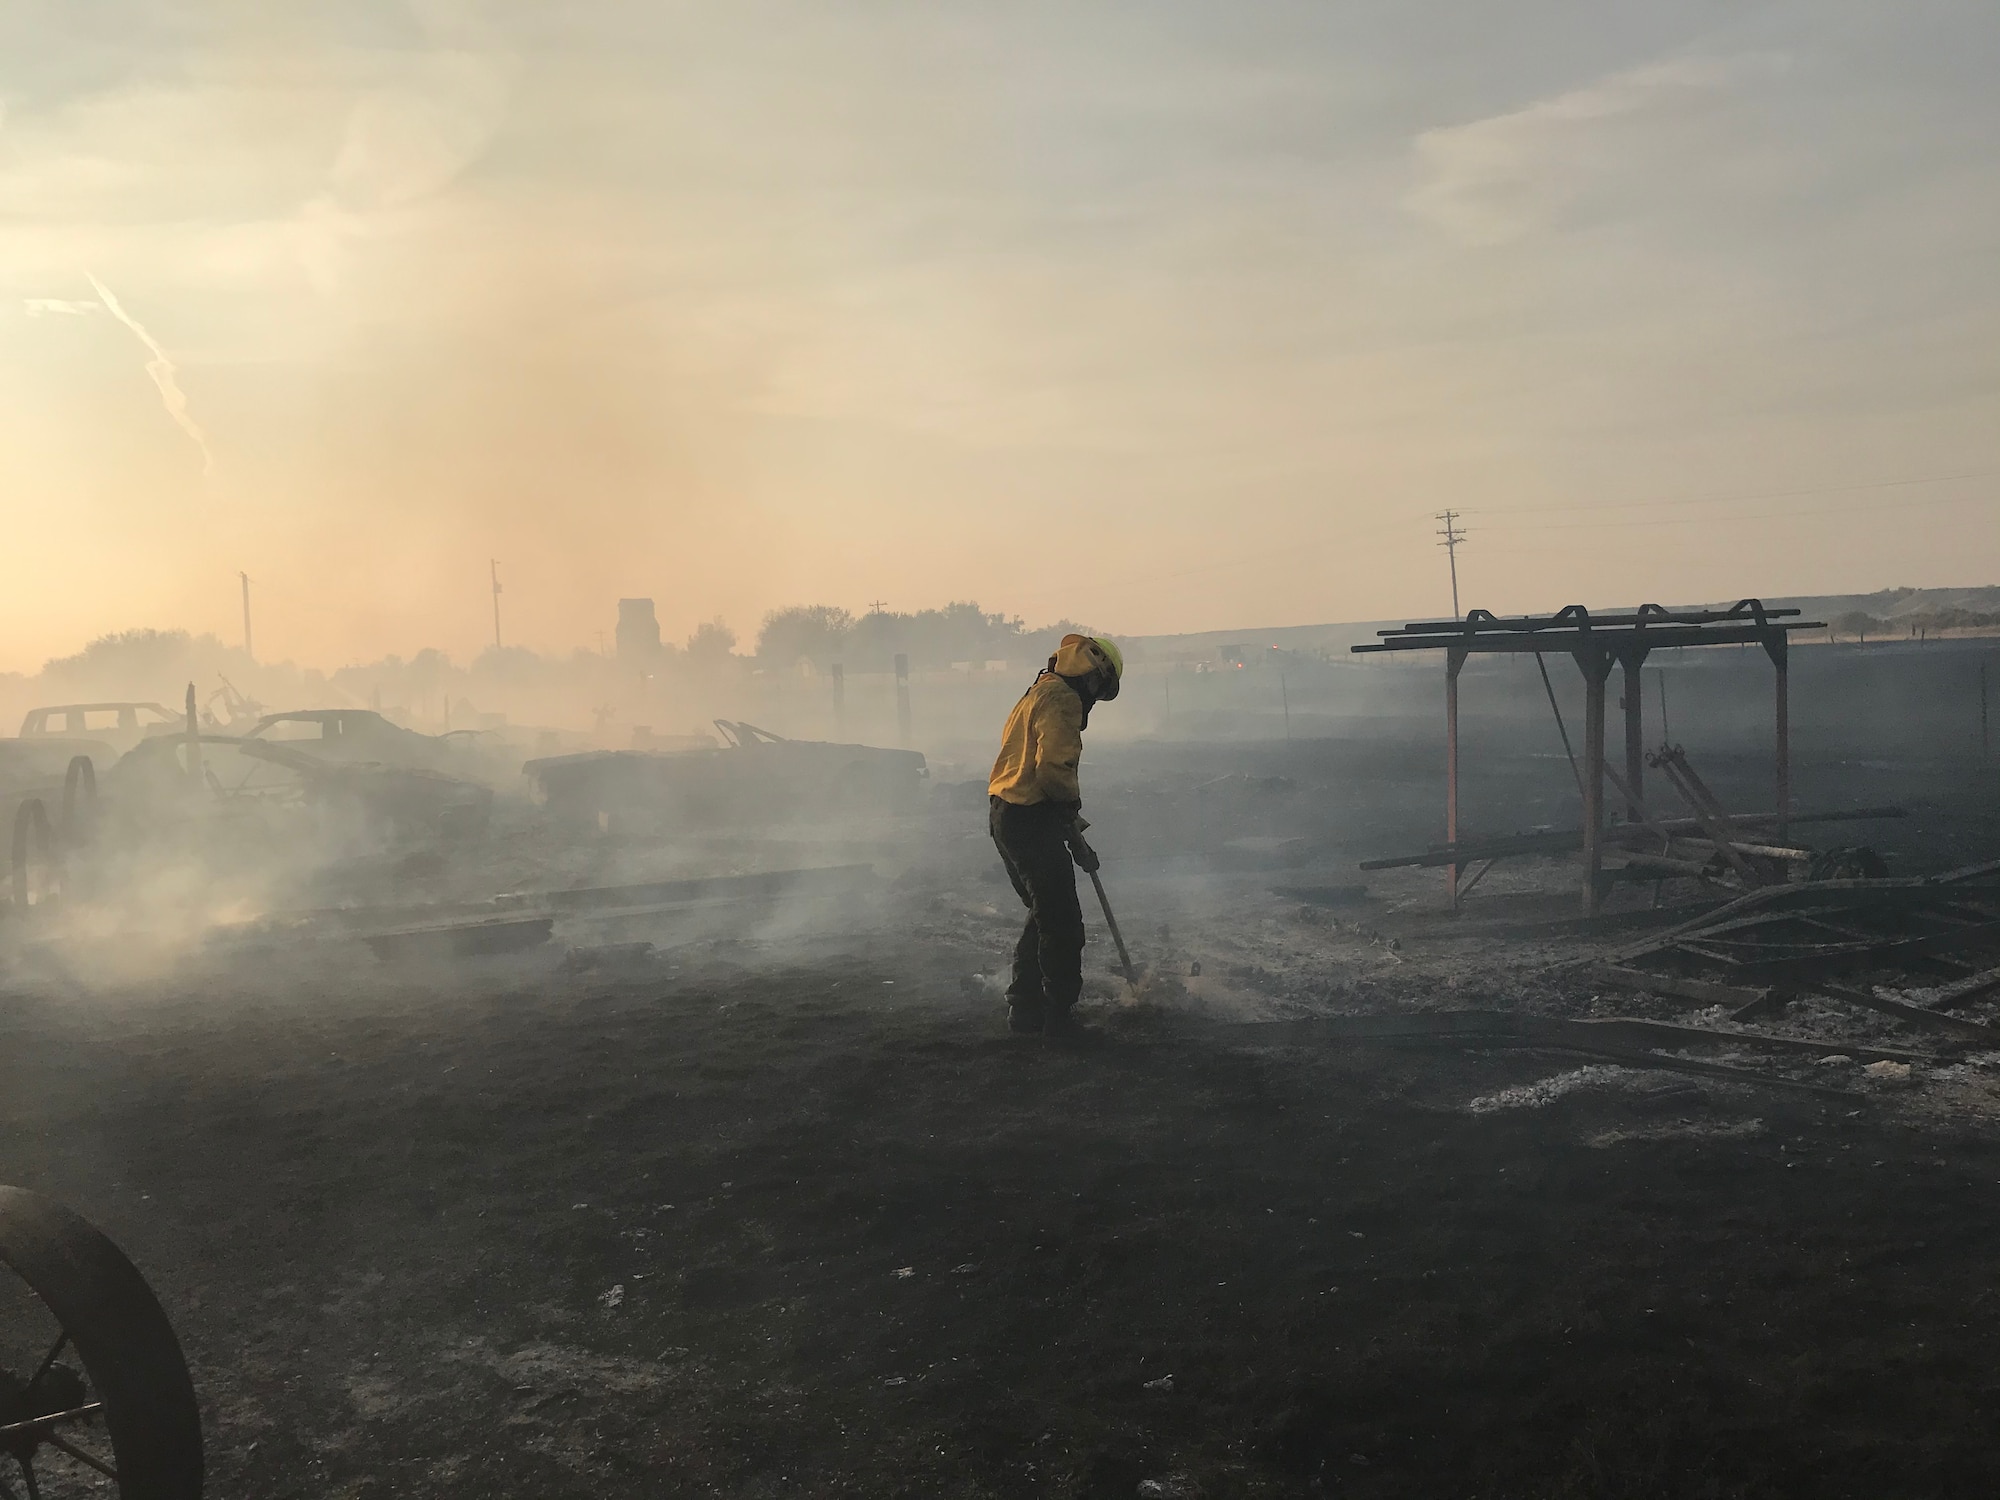 A fire fighter responds to a wildland fire Oct. 8, 2020, near Fort Shaw, Mont.